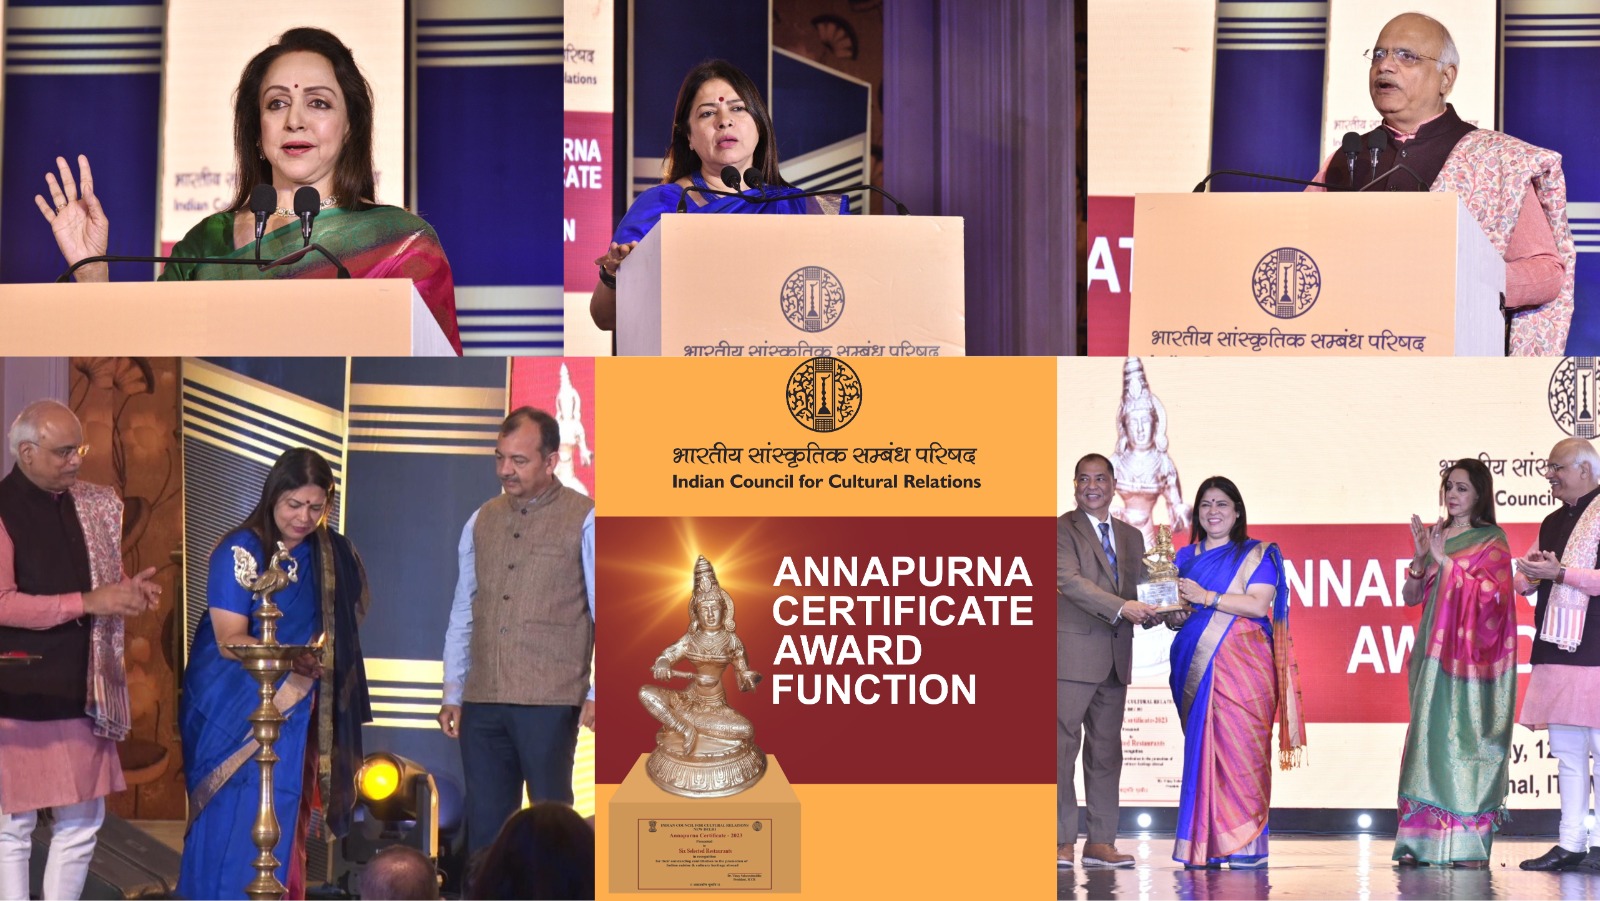 MoS for External Affairs&Culture,Smt. Meenakashi Lekhi and MP(Lok Sabha),Smt.Hema Malini presented ICCR’s ‘Annapurna Certificate’ to the winner restaurants from 6 countries,in the august presence of President,ICCR,Dr. Vinay Sahasrabuddhe on 12 Dec 23.